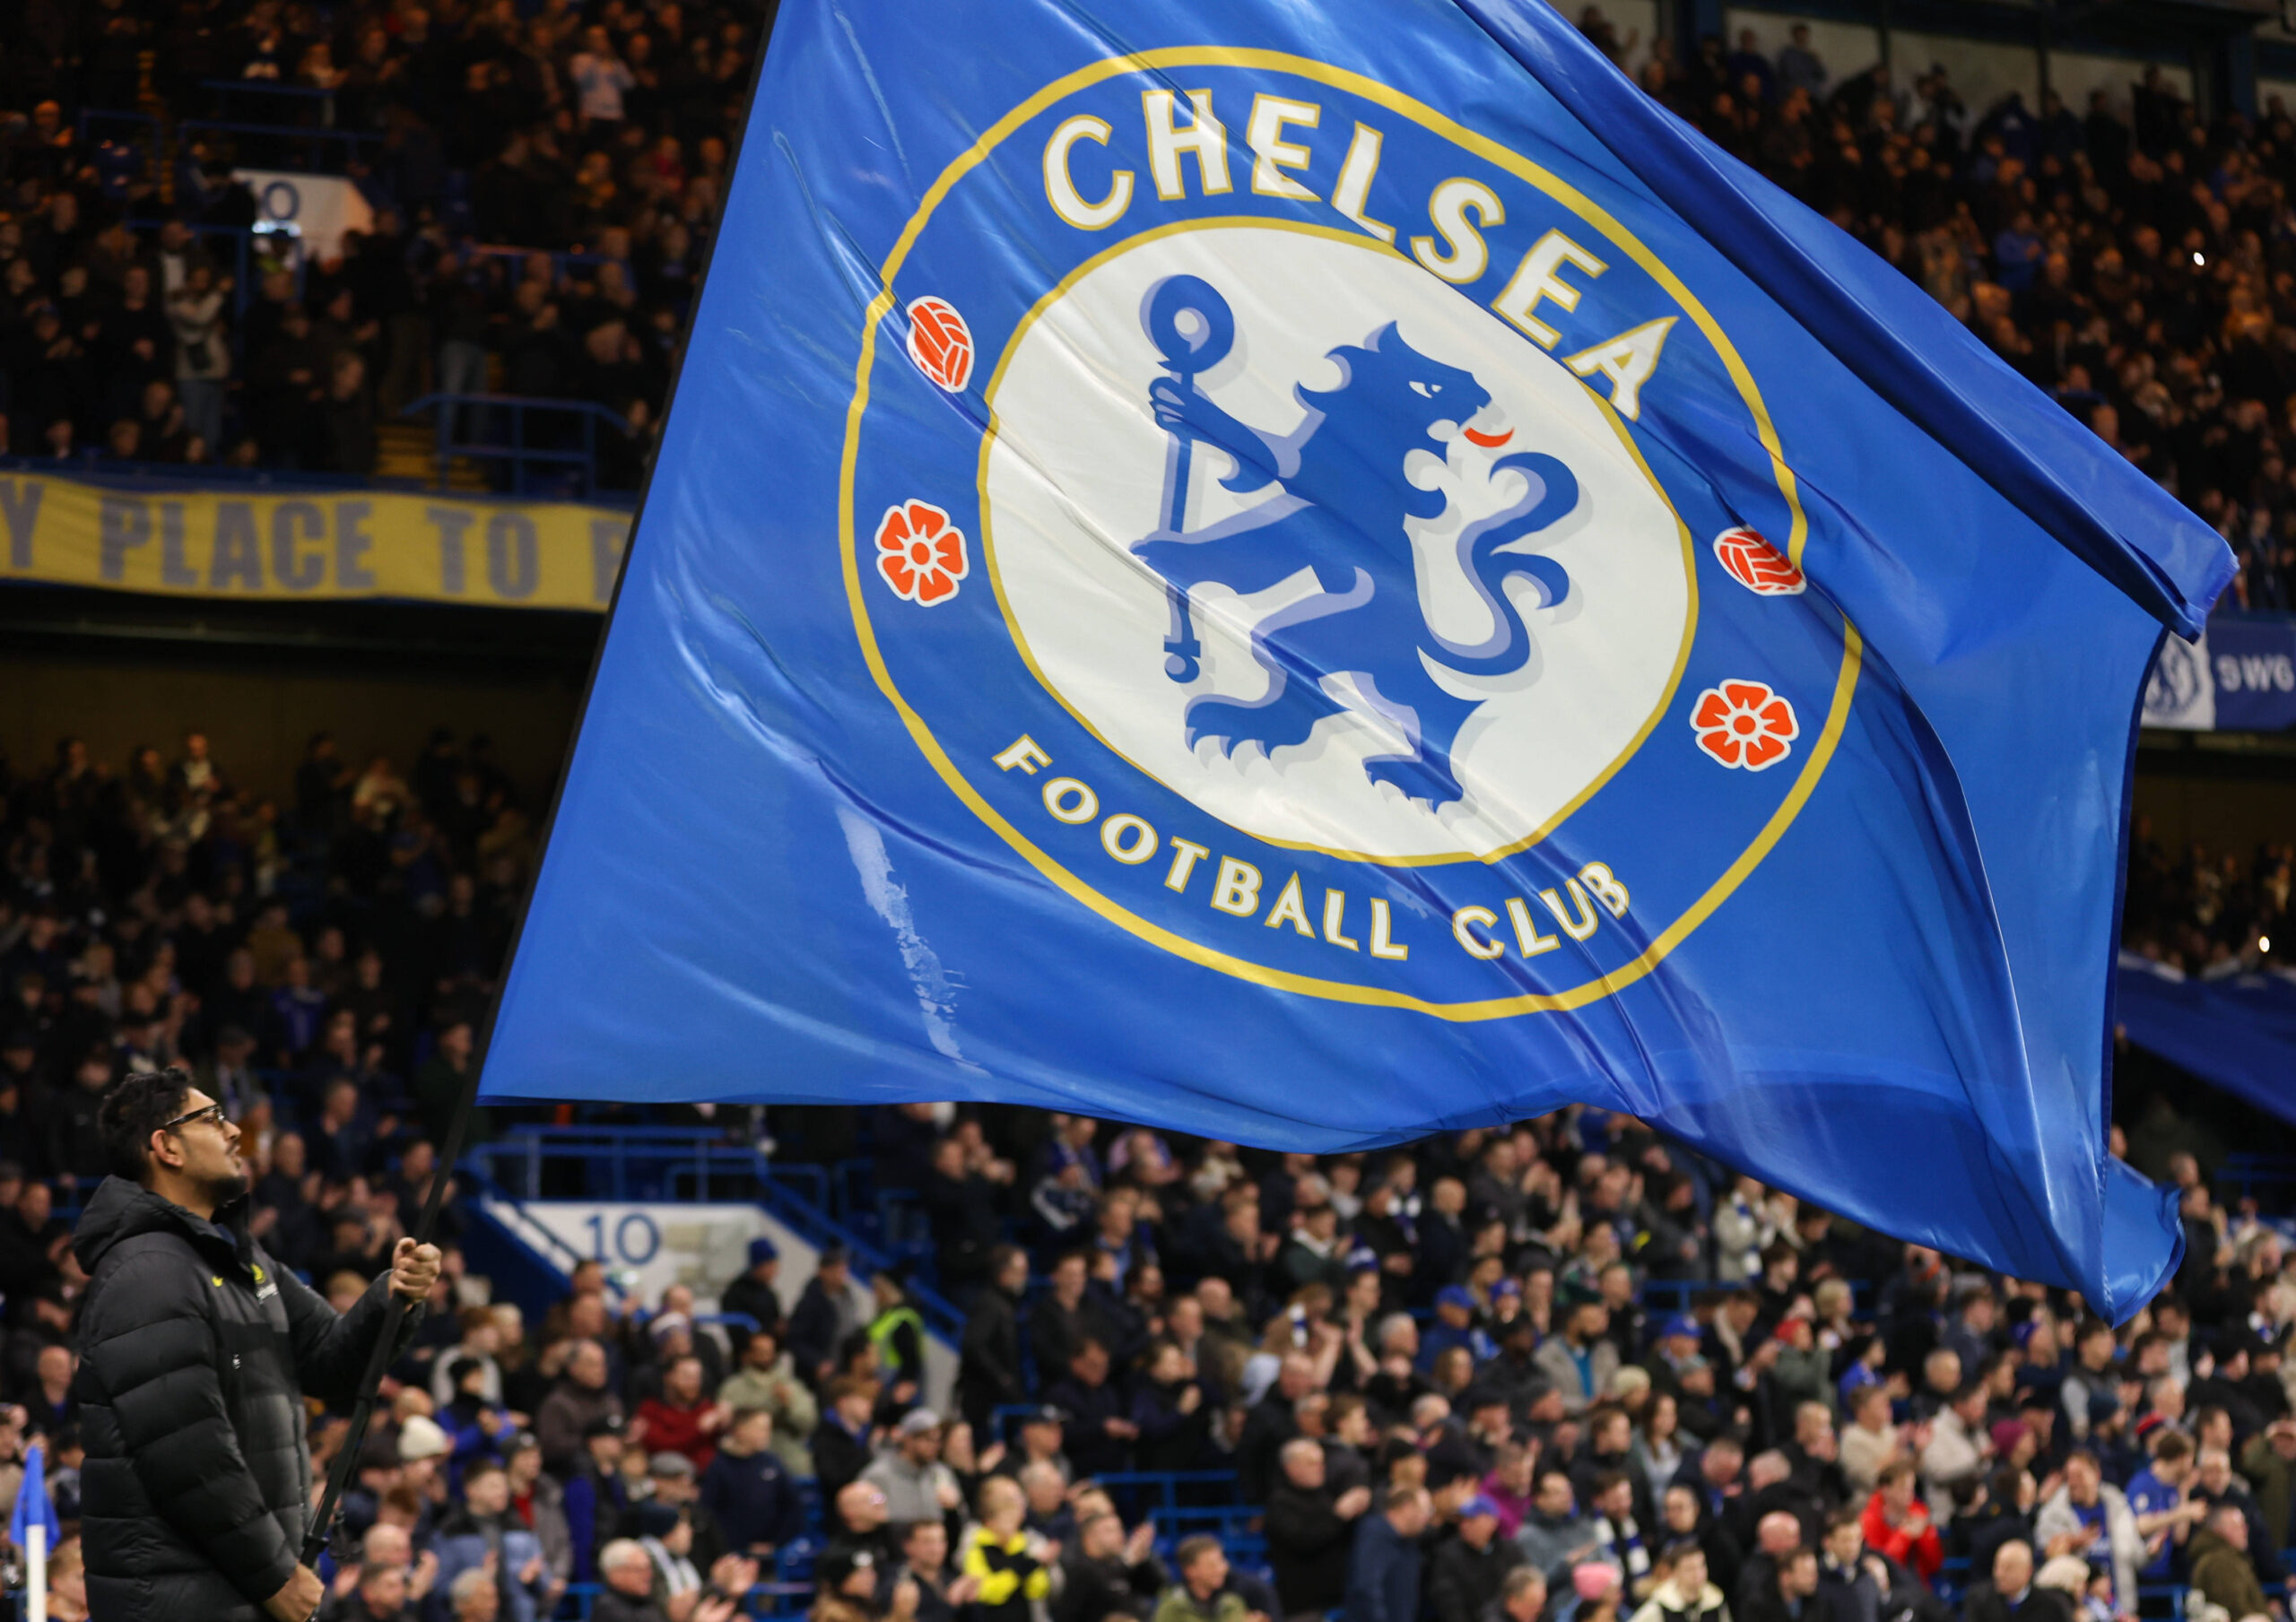 Chelsea flag being raised by fans at Stamford Bridge